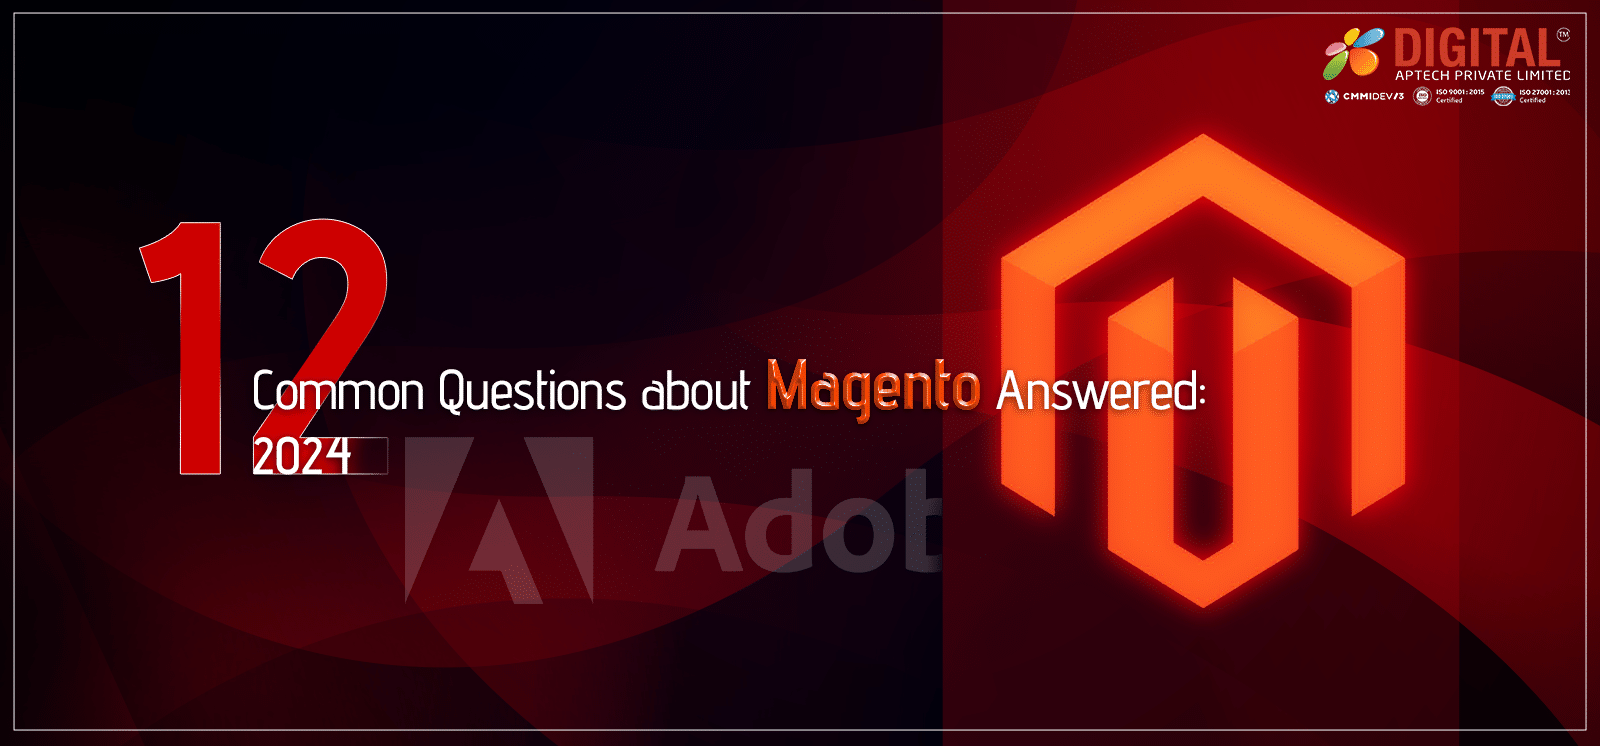 12 Common Questions about Magento Answered: 2024